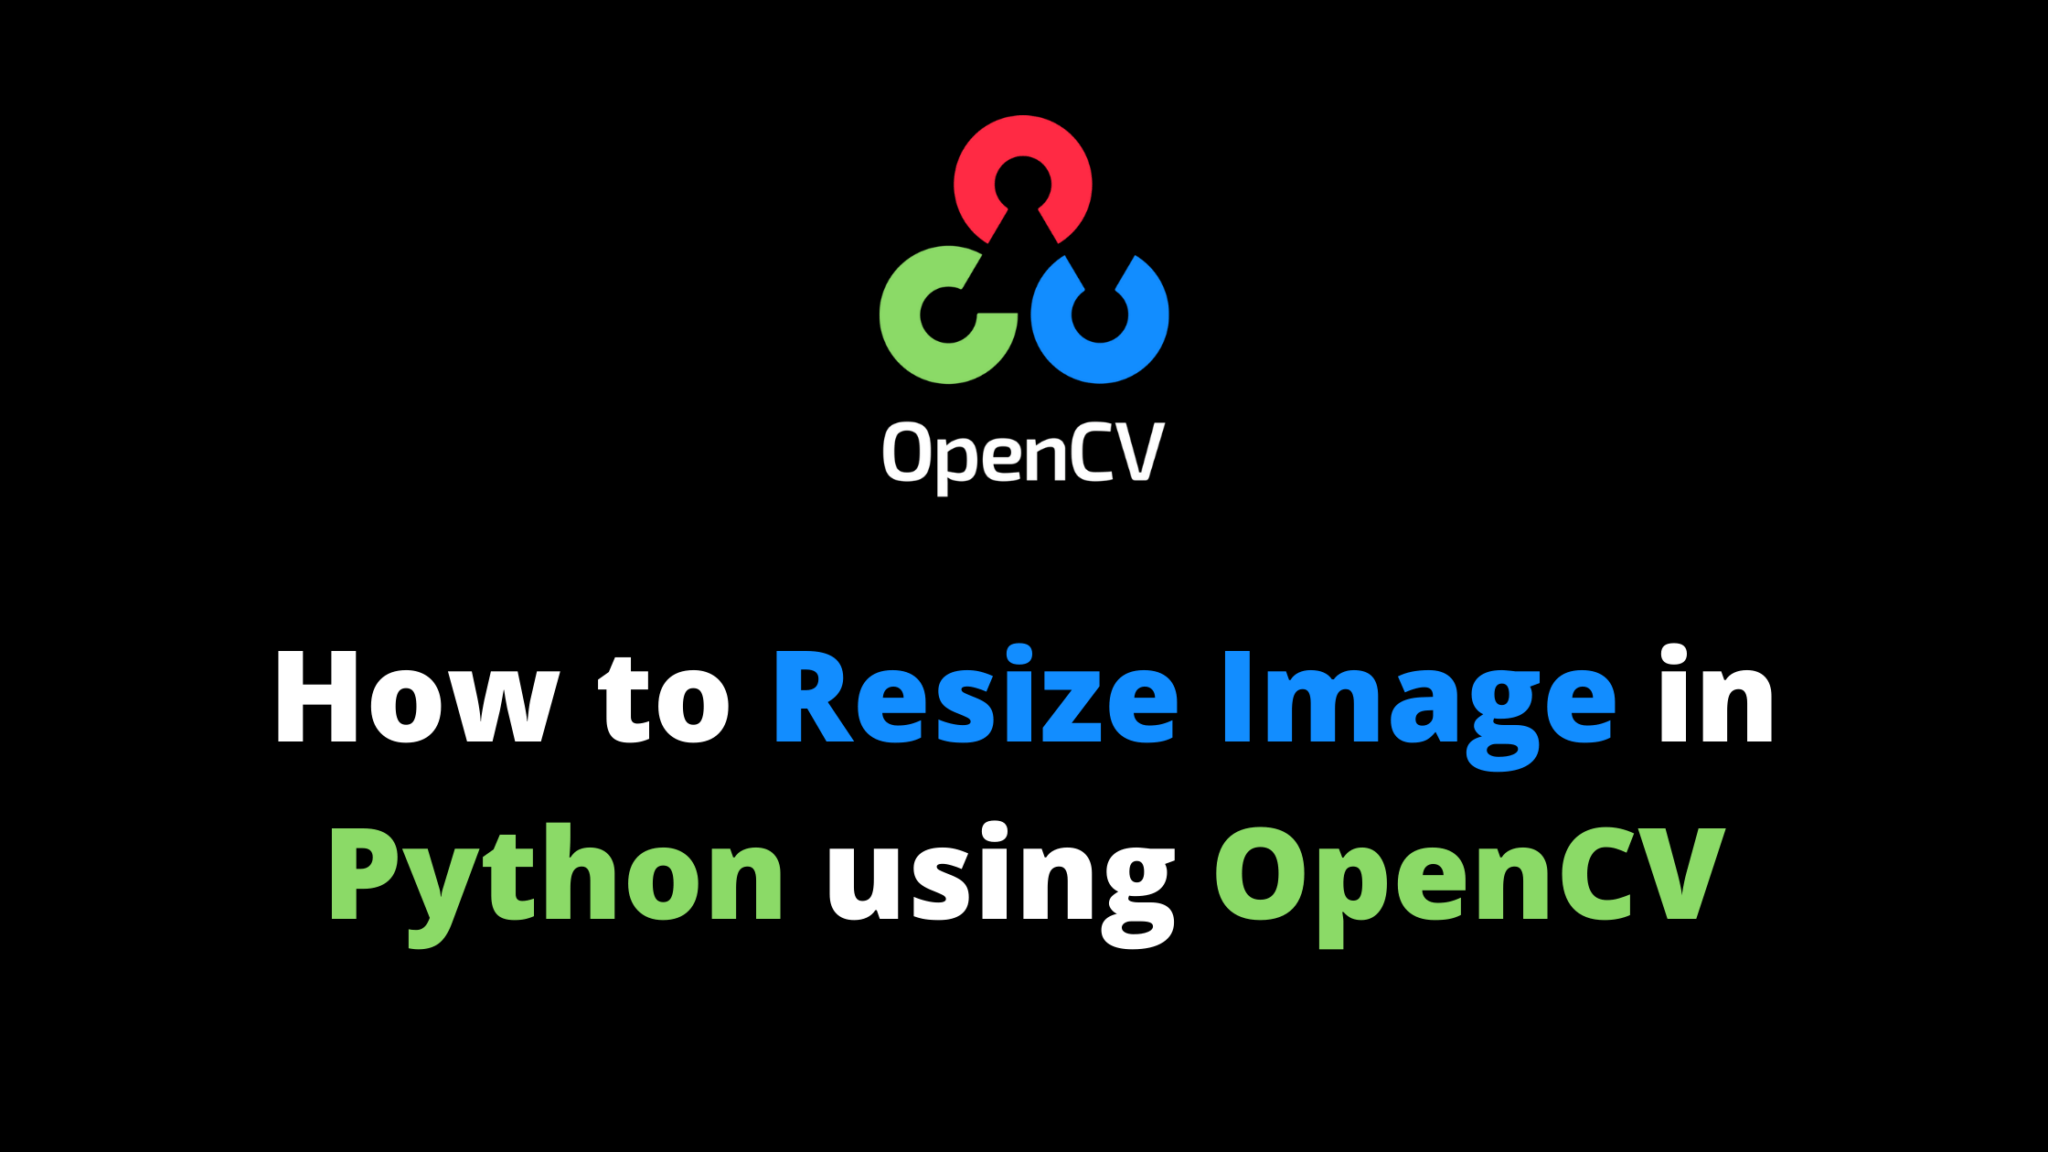 How To Install Opencv In Python Using Anaconda Prompt Aihints